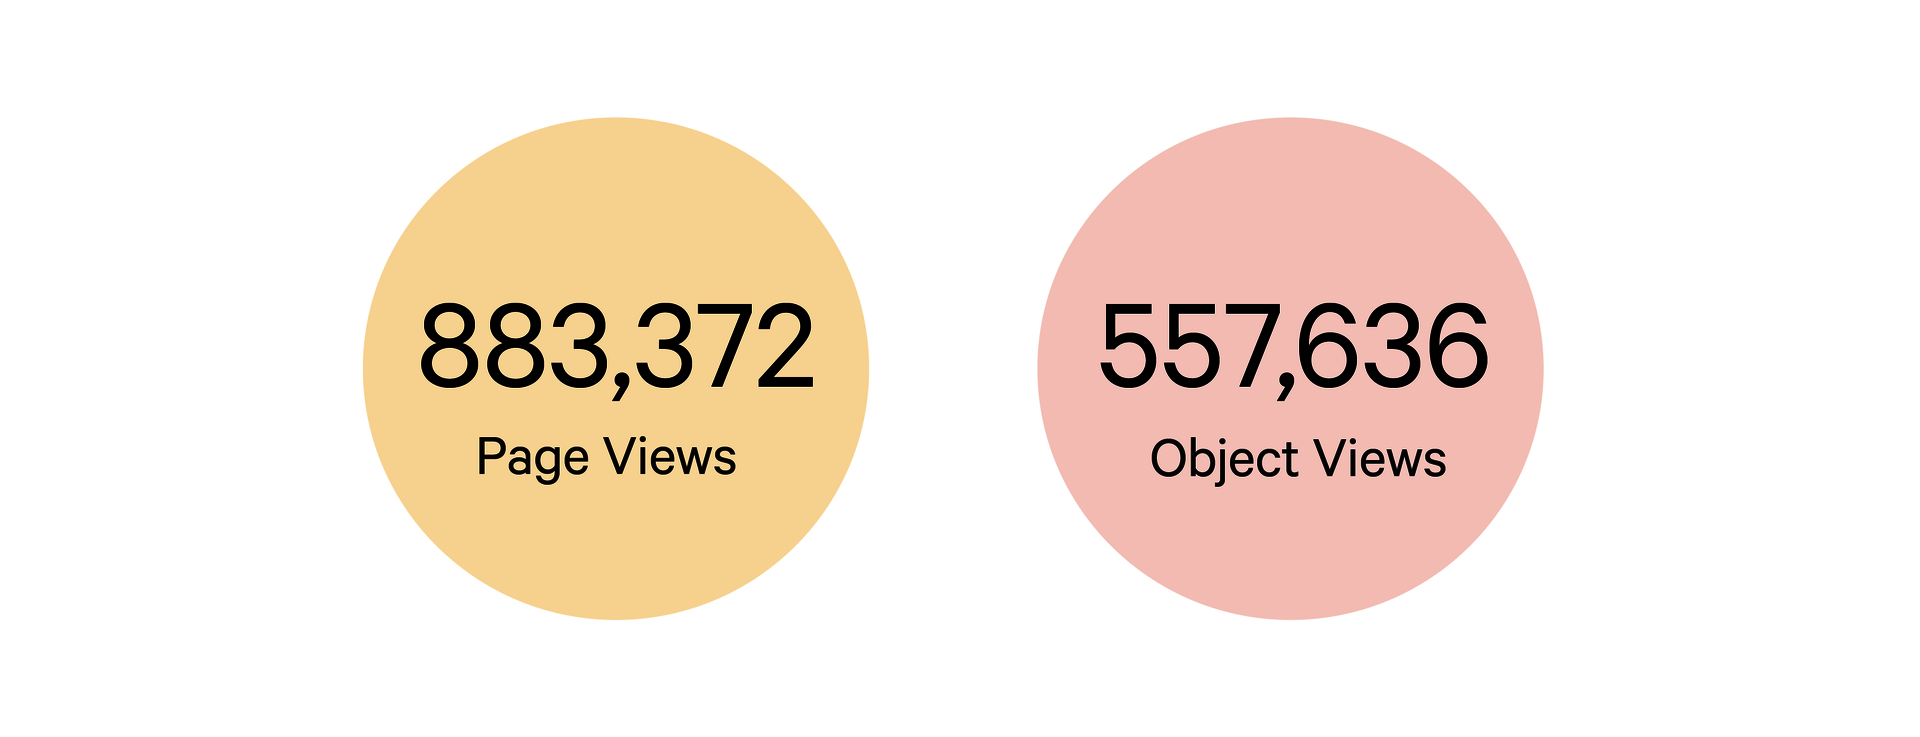 Two circles each with text inside; one is pale yellow, one is pink. They say: “883,372 Page Views. 557,636 Object Views.” 